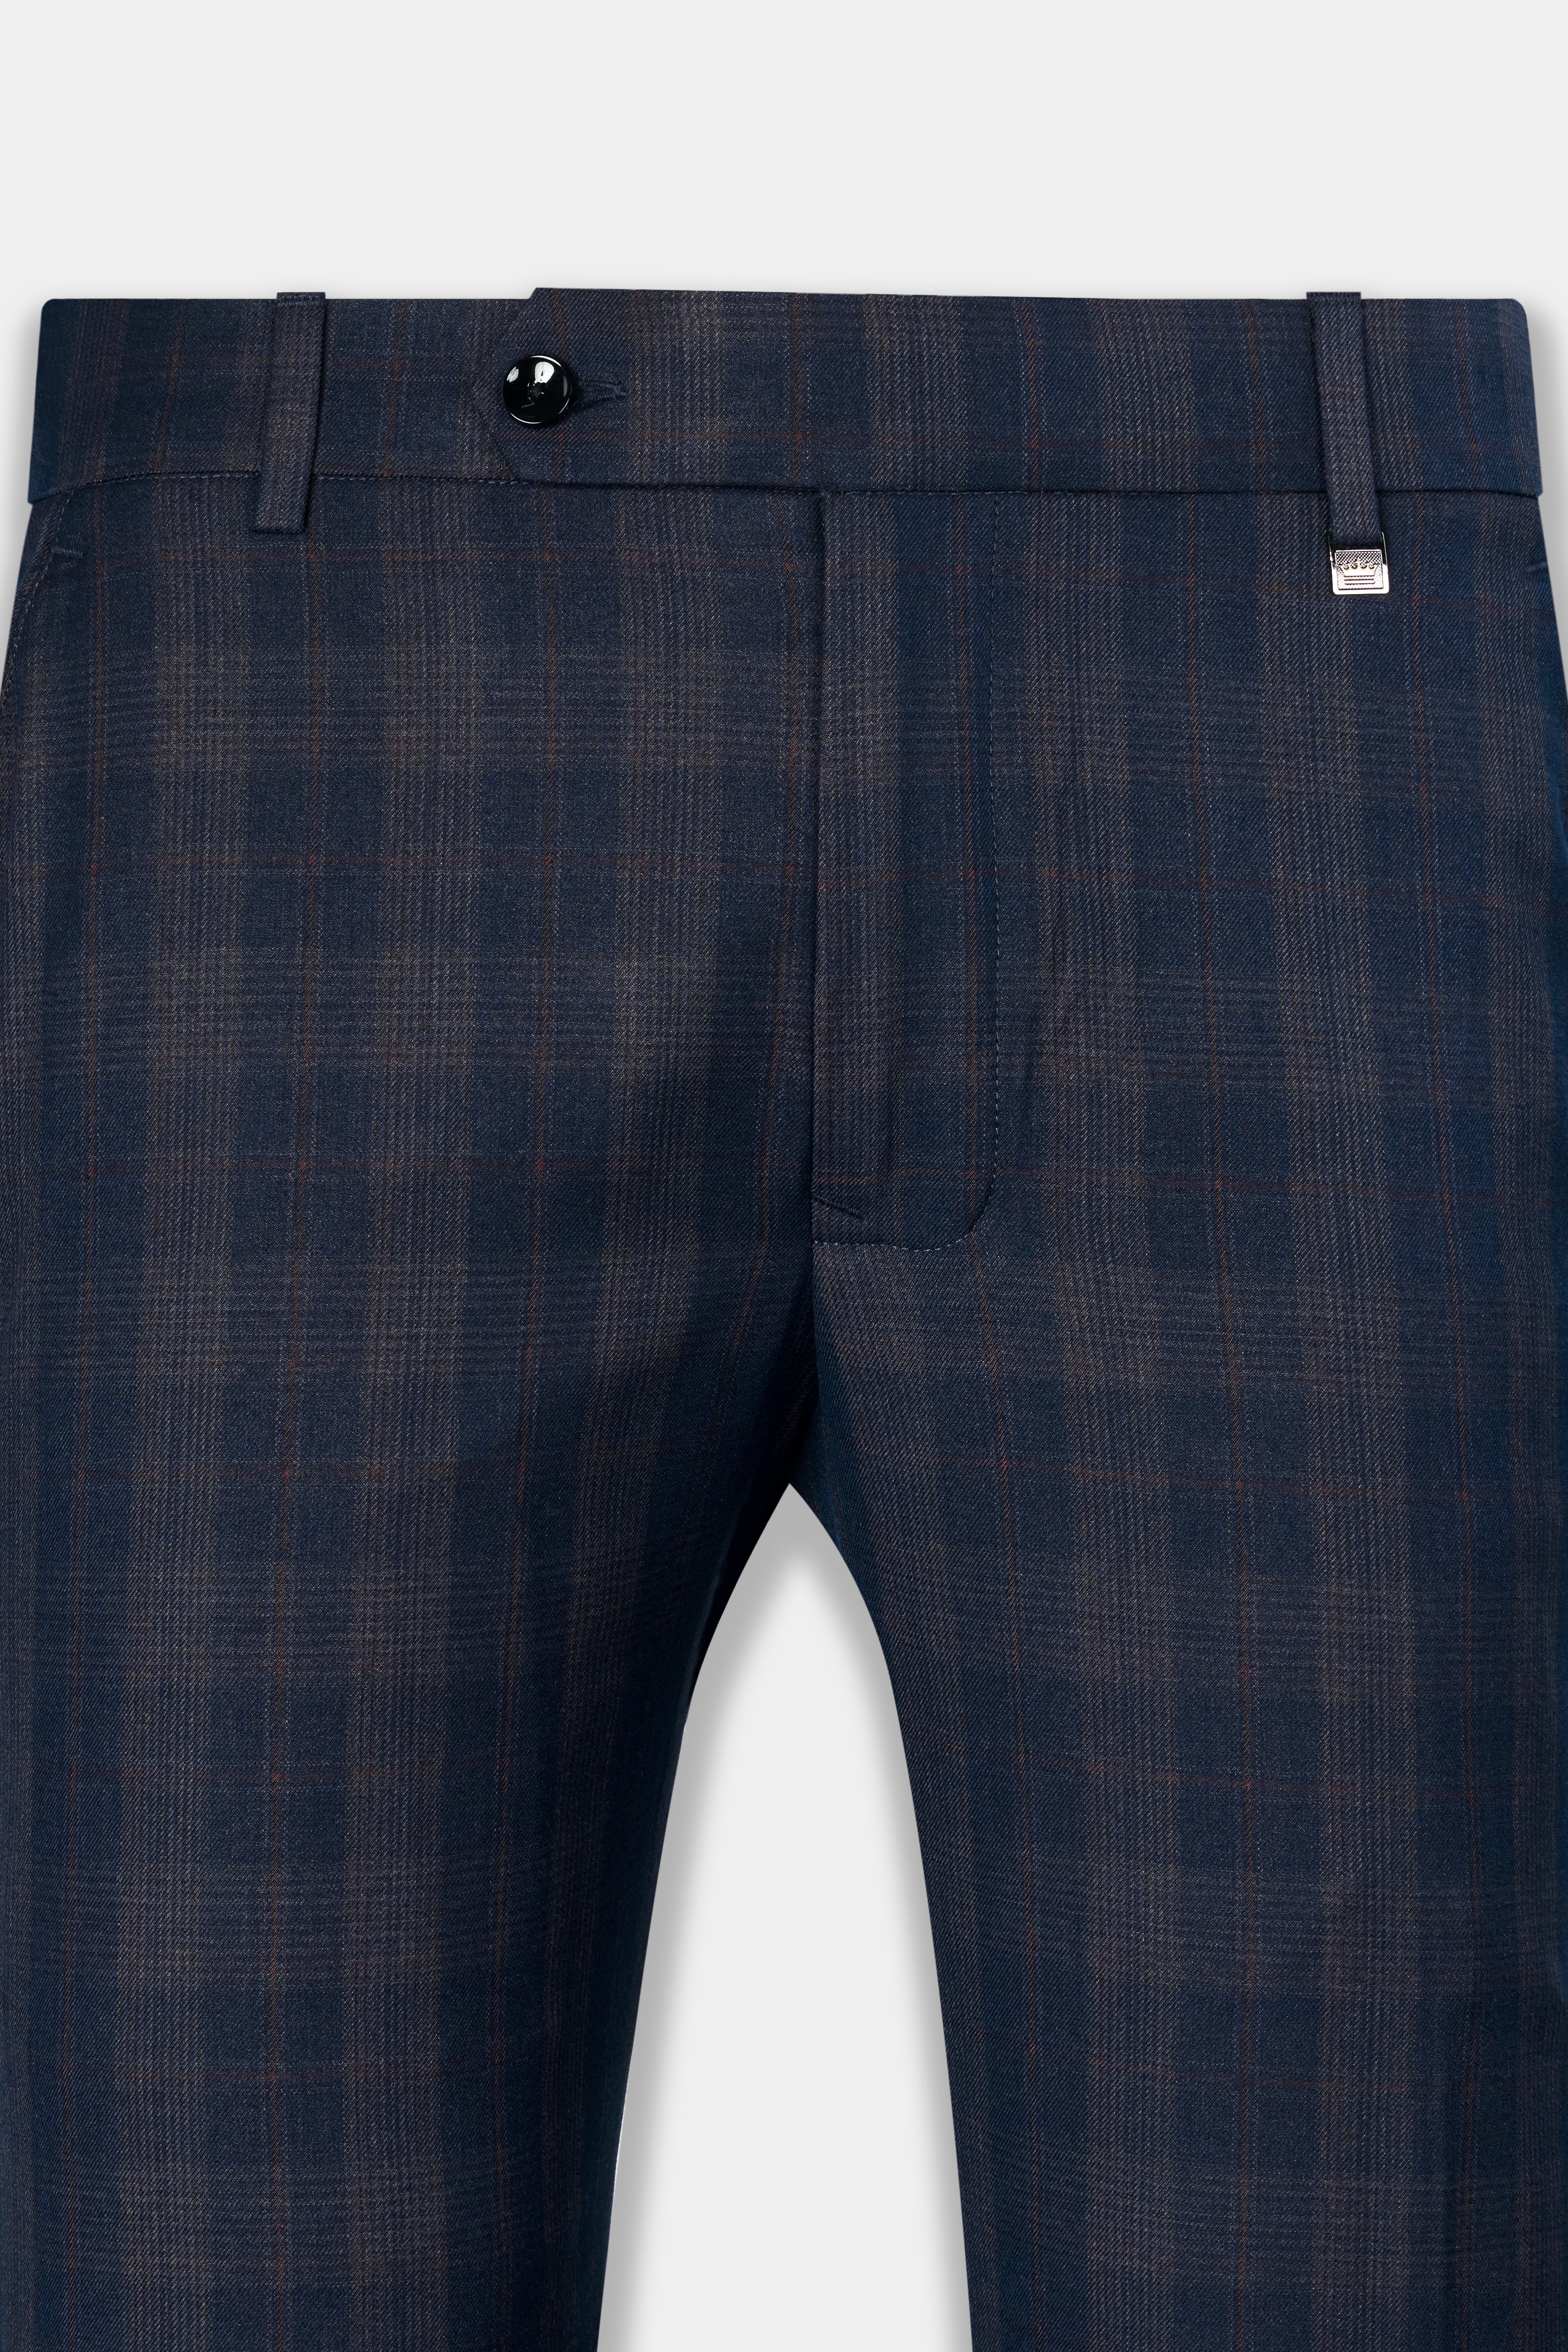 Admiral Blue and Cinereous Brown Plaid Wool Rich Cross Buttoned Bandhgala Suit ST2872-CBG2-36,ST2872-CBG2-38,ST2872-CBG2-40,ST2872-CBG2-42,ST2872-CBG2-44,ST2872-CBG2-46,ST2872-CBG2-48,ST2872-CBG2-50,ST2872-CBG2-52,ST2872-CBG2-54,ST2872-CBG2-56,ST2872-CBG2-58,ST2872-CBG2-60